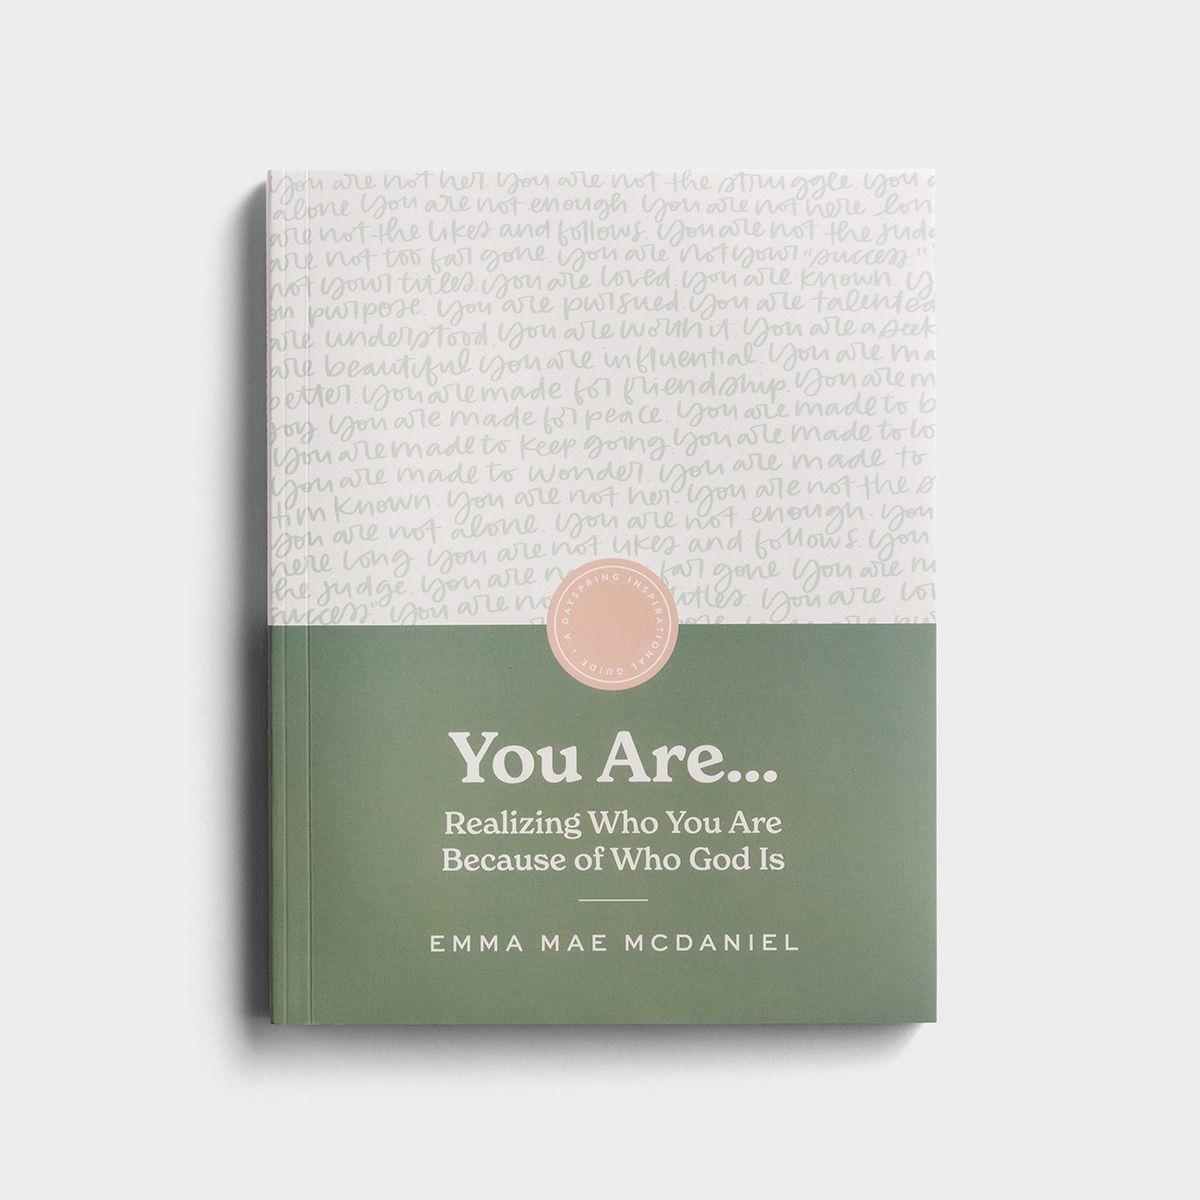 You Are: Realizing Who You Are Because of Who God Is - Inspirational Guide